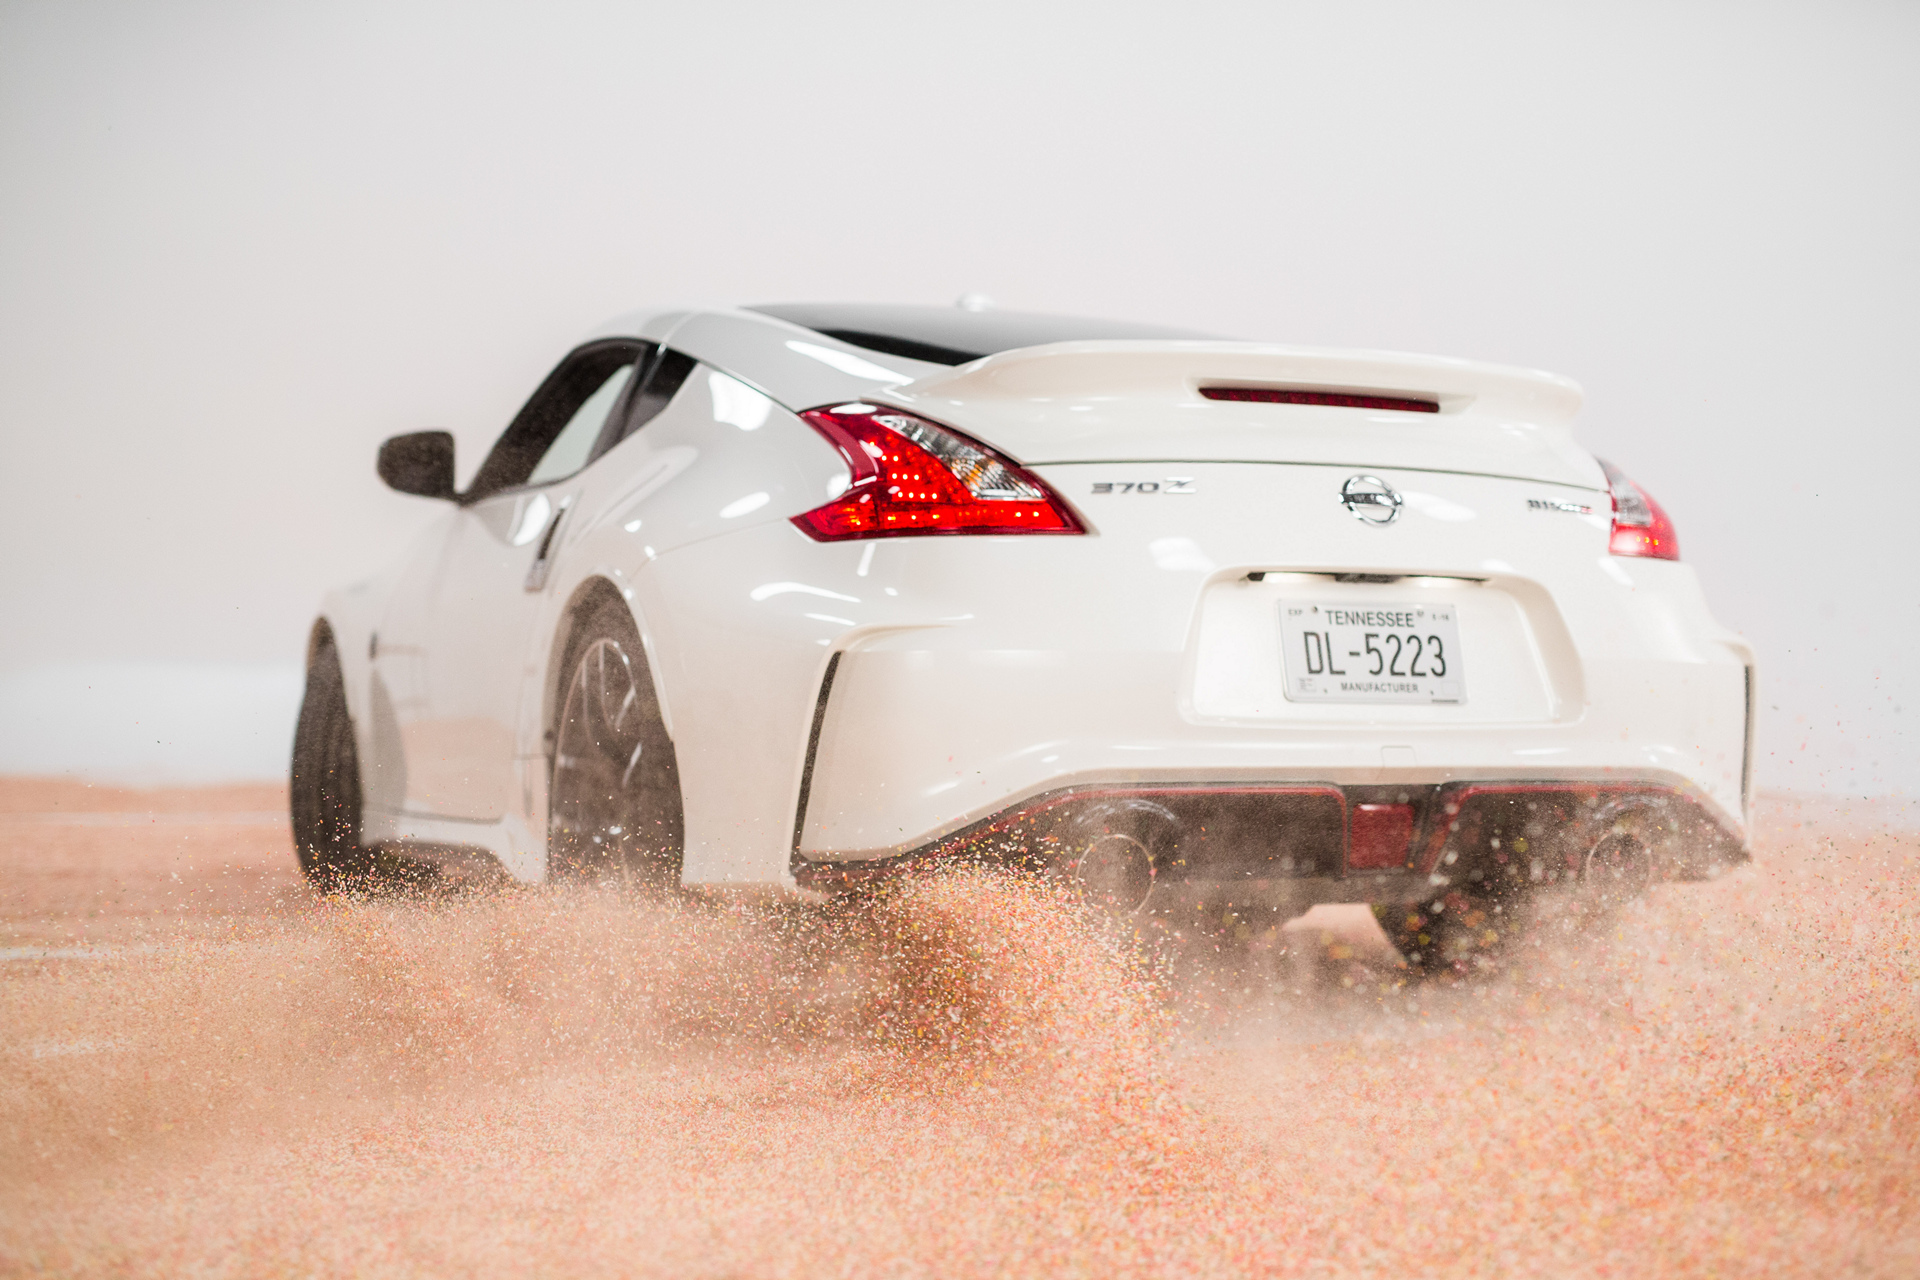 How to make a donut, by the Nissan 370Z NISMO © Nissan Motor Co., Ltd.